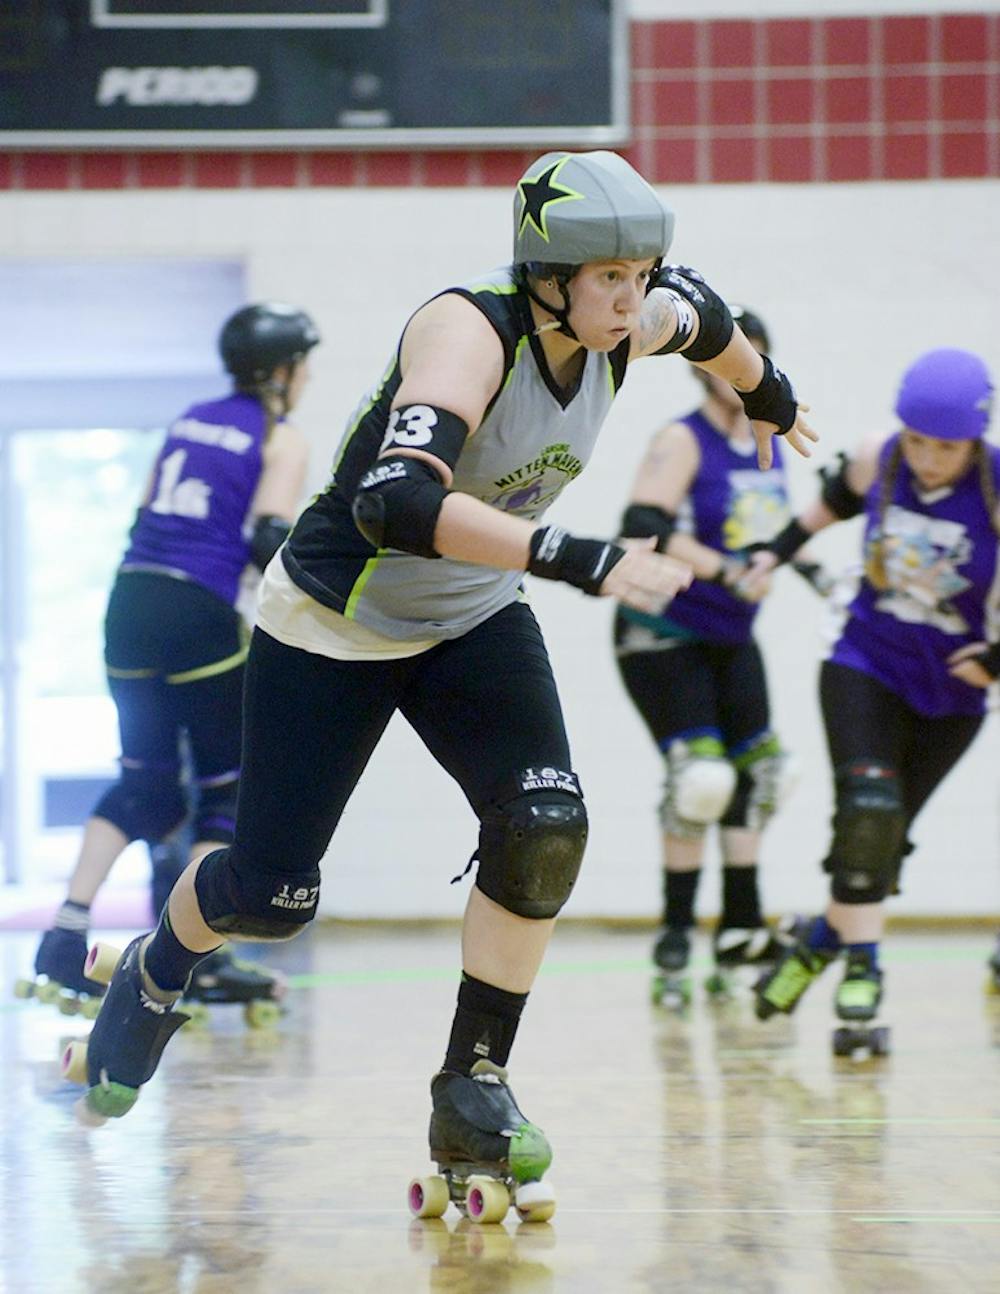 <p>Samantha Perez, who goes by "El Gingero"for the Lansing Mitten Mavens Roller Derby team, gets out in front of the defense during their match against the Bath City Roller Girls on June 20th, 2015 at Court One Training Center in East Lansing. Wyatt Giangrande/The State News</p>